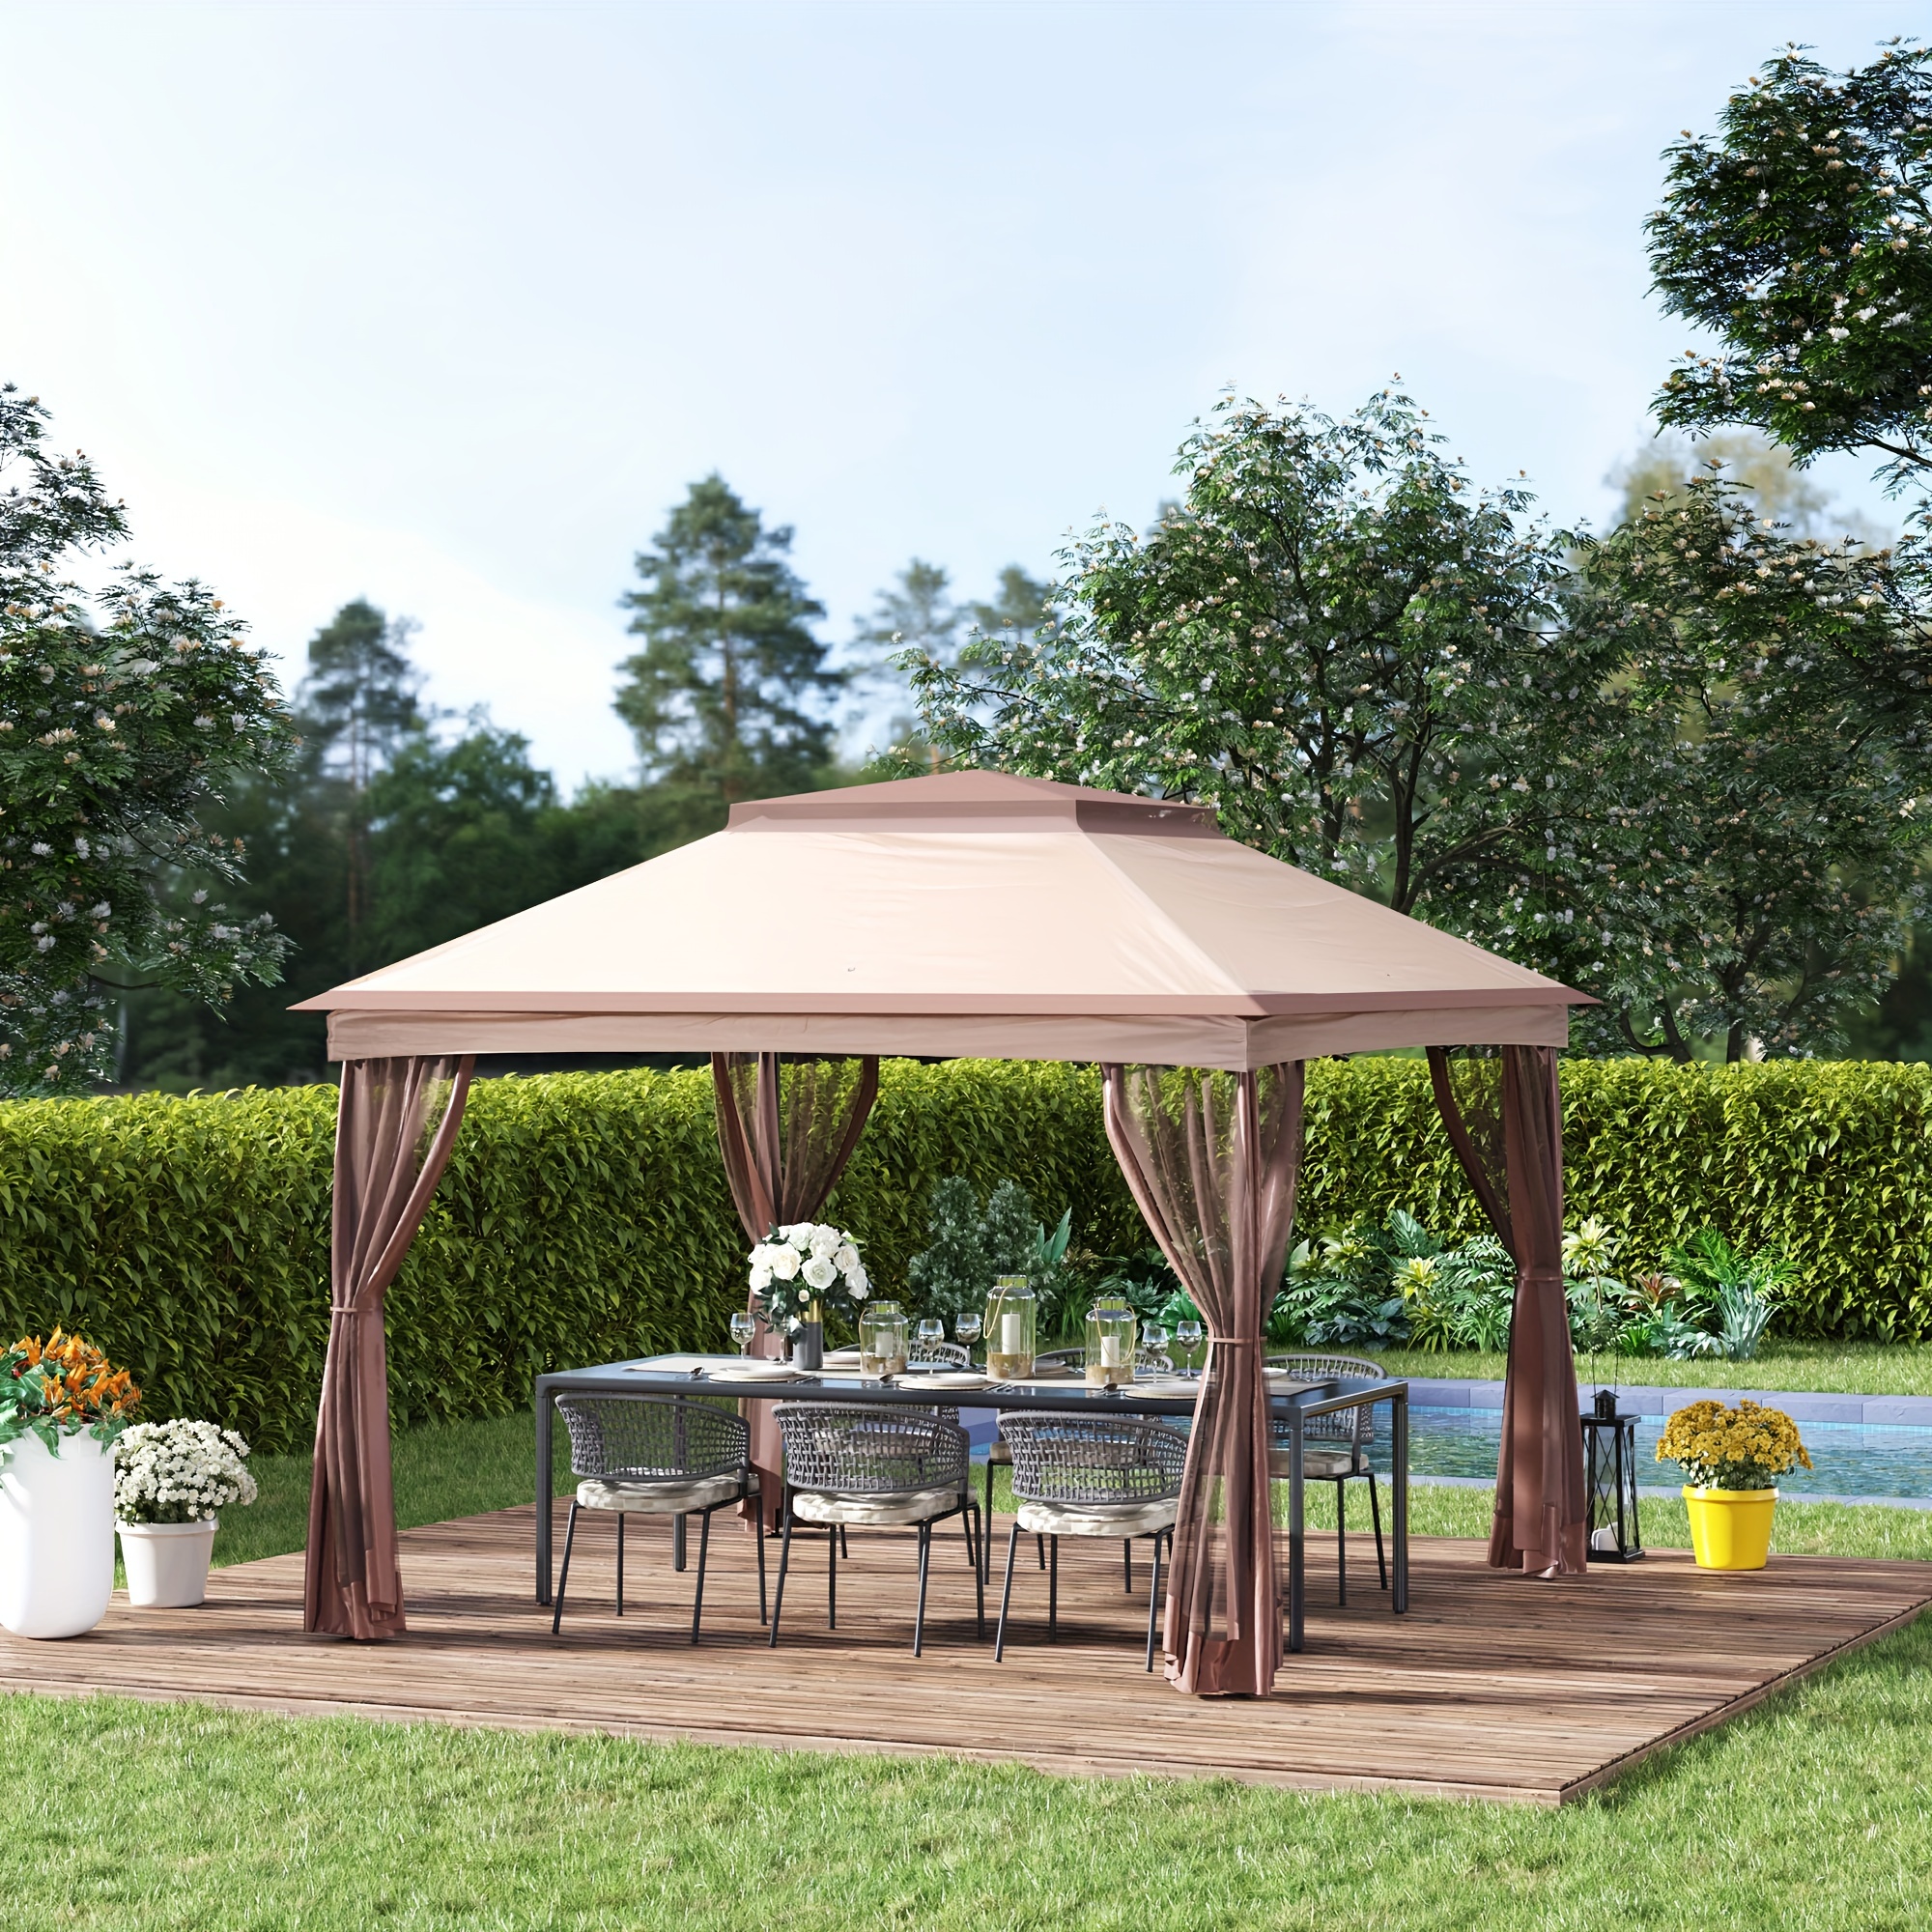 

11' X 11' Pop Up Canopy, Outdoor Patio Gazebo Shelter With Removable Zipper Netting, Instant Event Tent W/ 114 Square Feet Of Shade And Carry Bag For Backyard, Garden